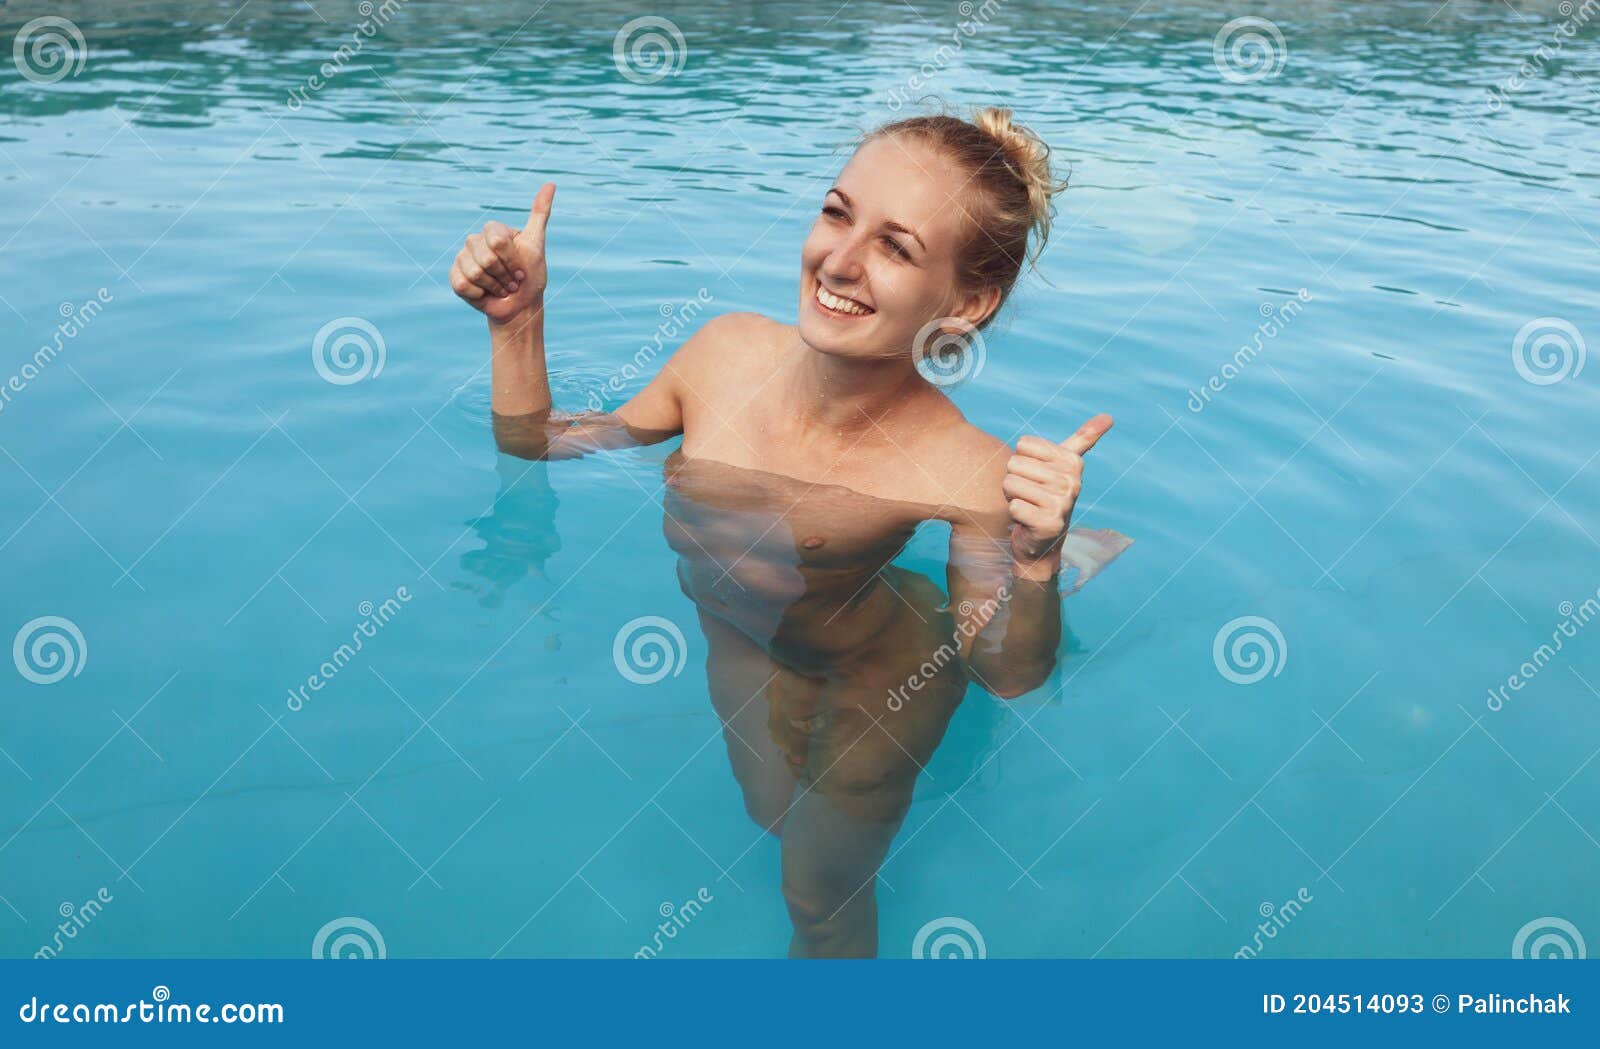 Nude Swimming Images